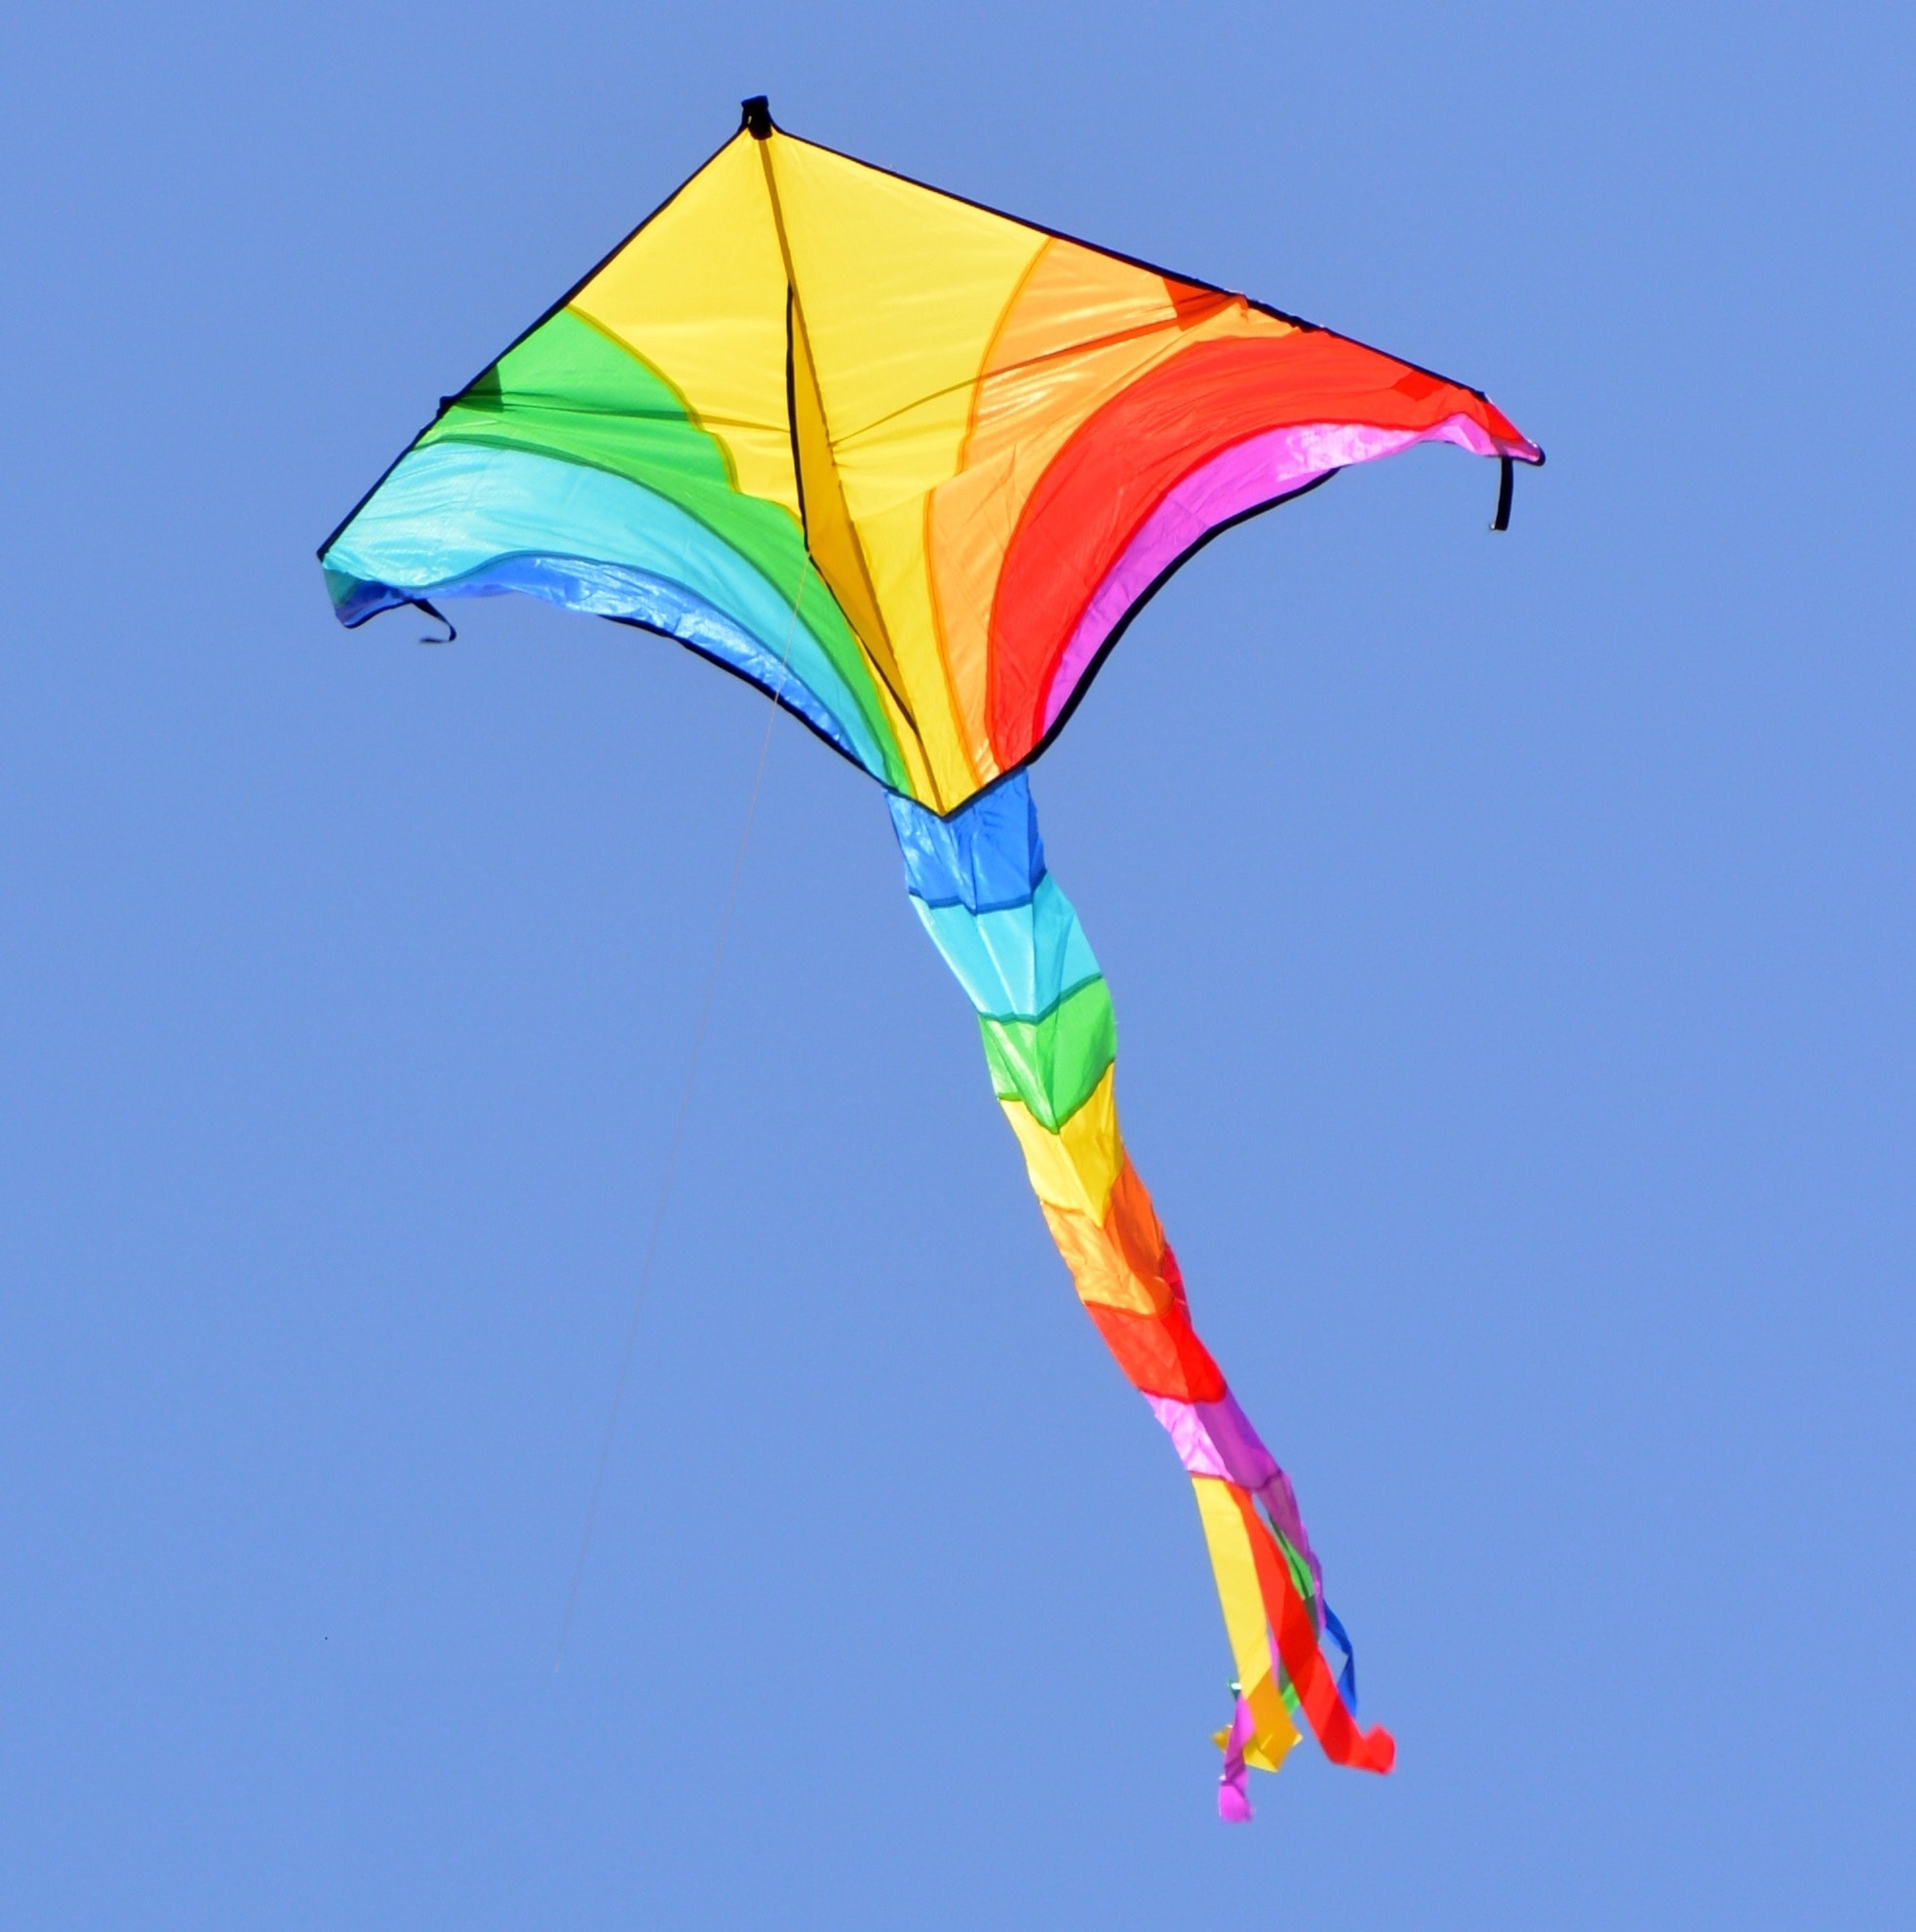 Kite Flying: Kite-making materials, A rainbow-colored kite, Custom design, Steering a kite. 1970x1990 HD Background.